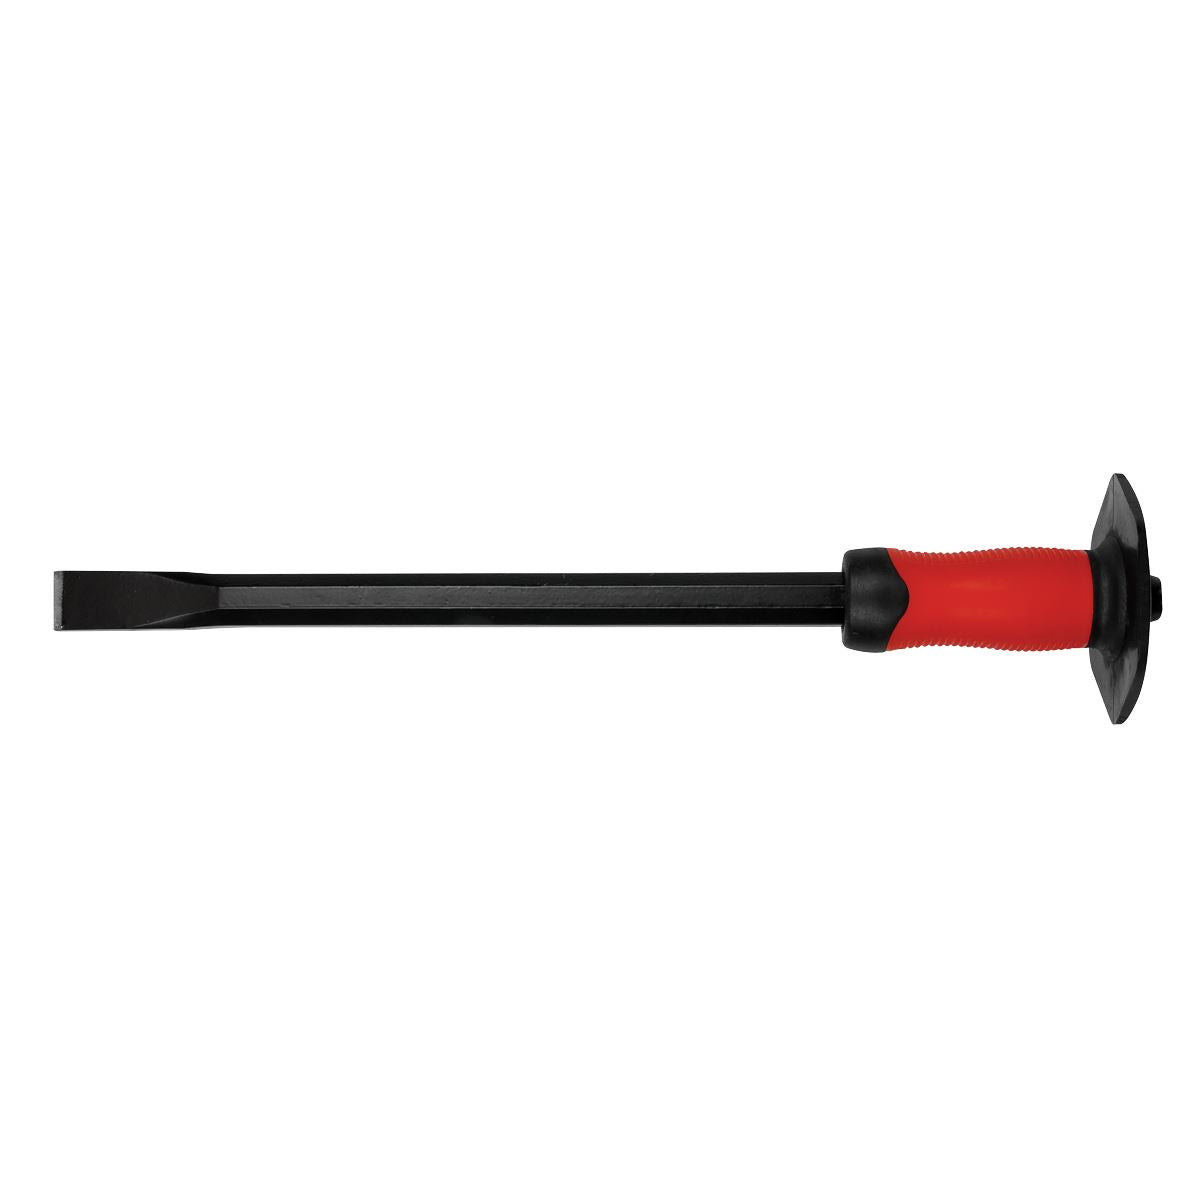 Sealey Cold Chisel With Grip 25 x 450mm